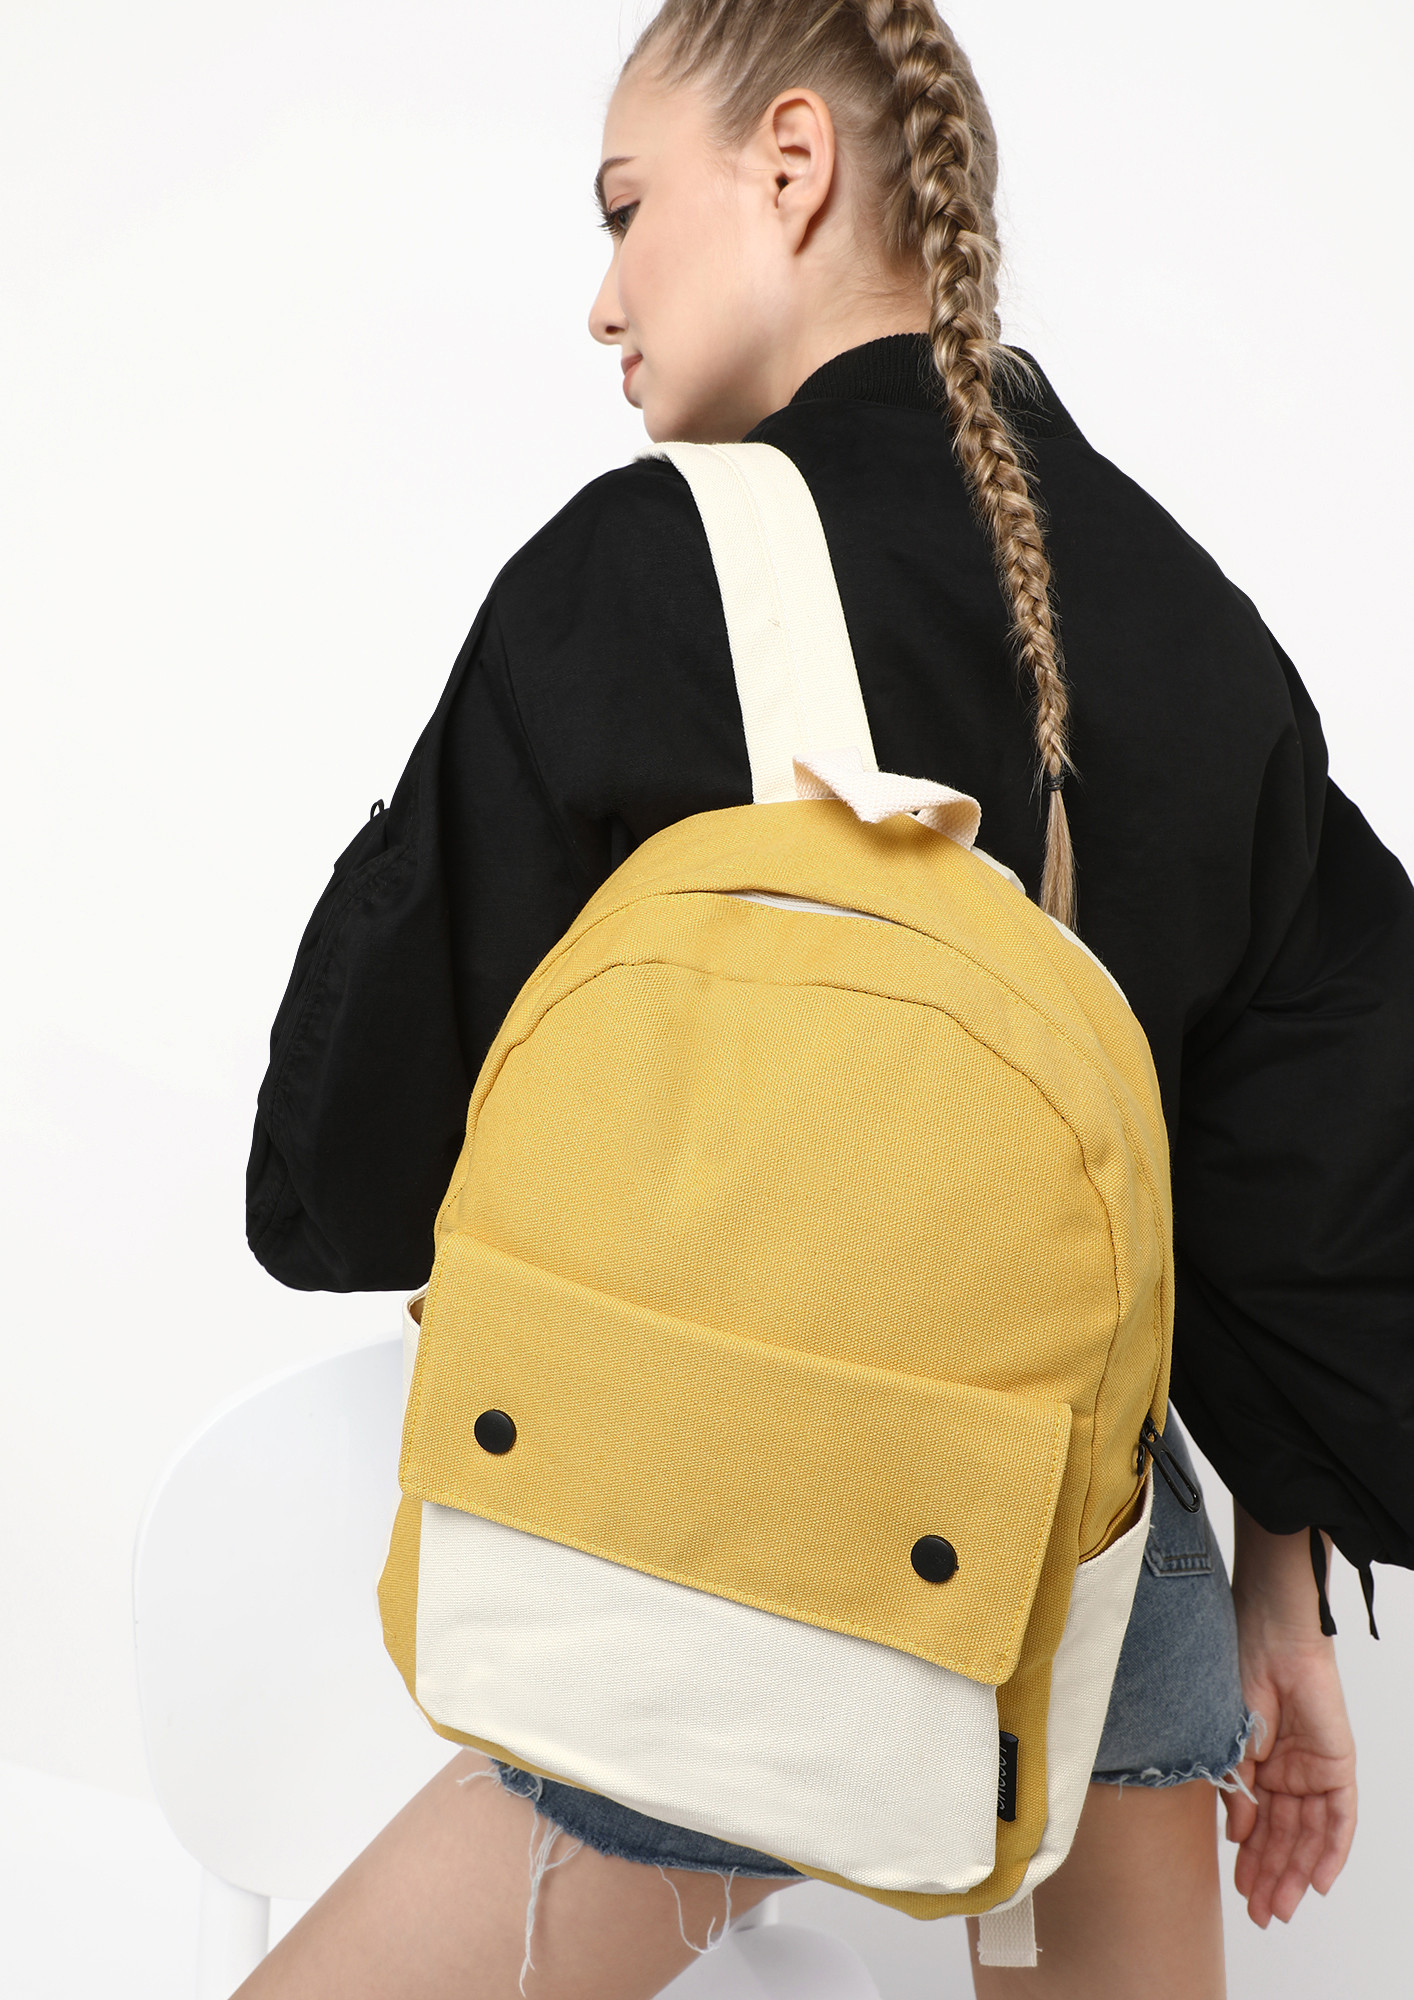 Mustard CONVERTIBLE BACKPACK, Backpack Purse, Everyday Bag, Leather Yellow  Backpack, Leather Backpack, Woman Backpack - Etsy